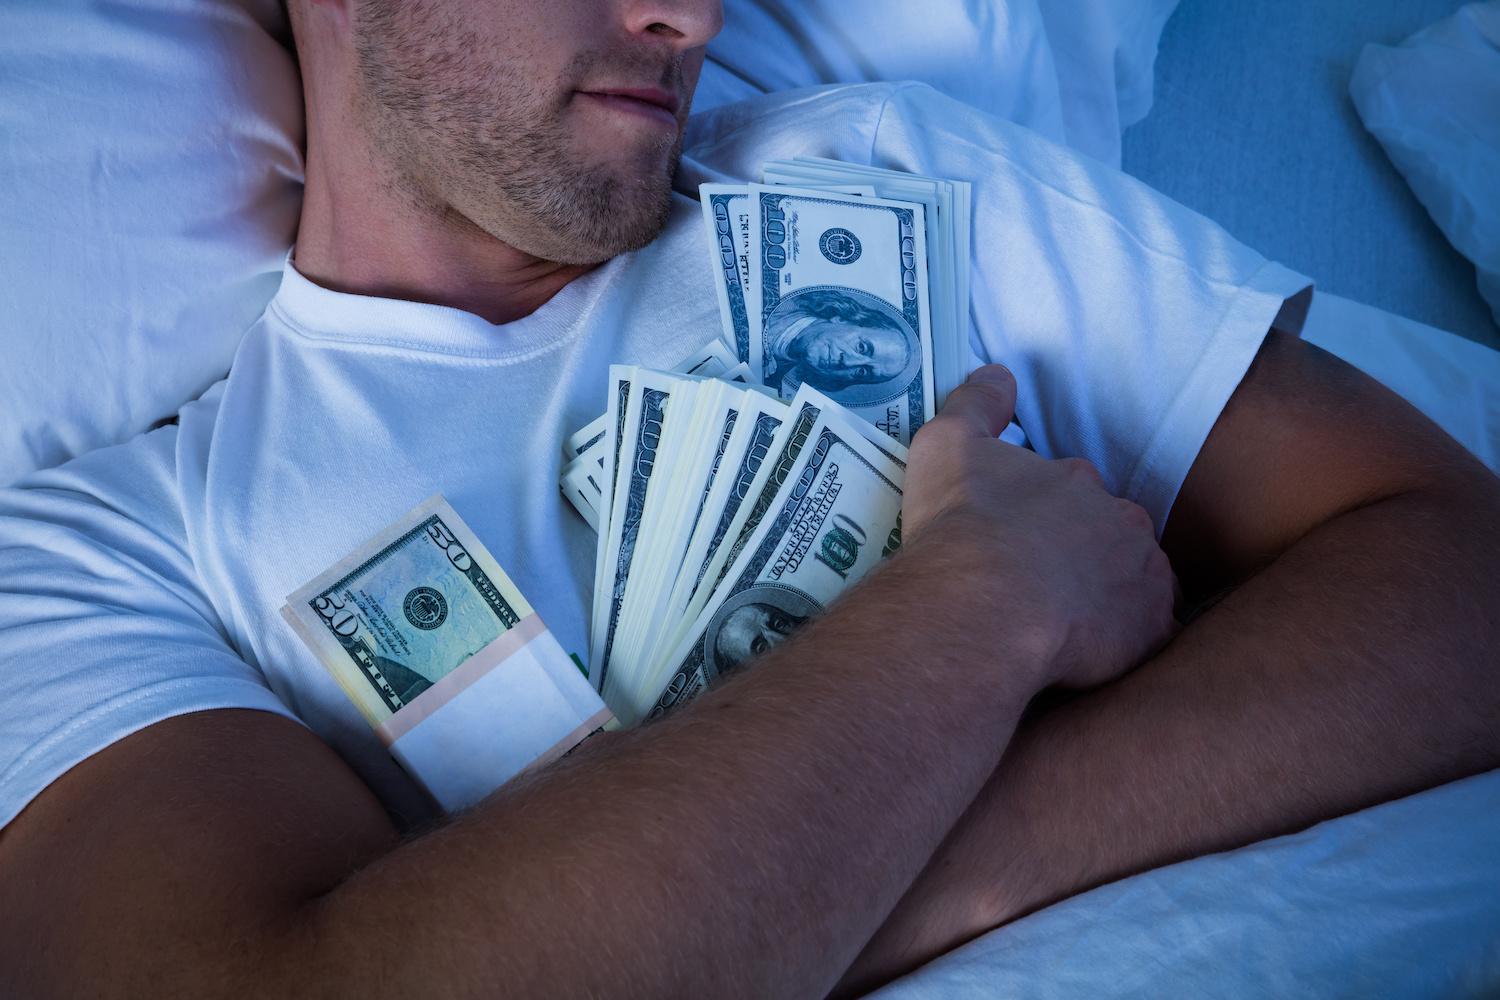 saving money while sleeping is awesome